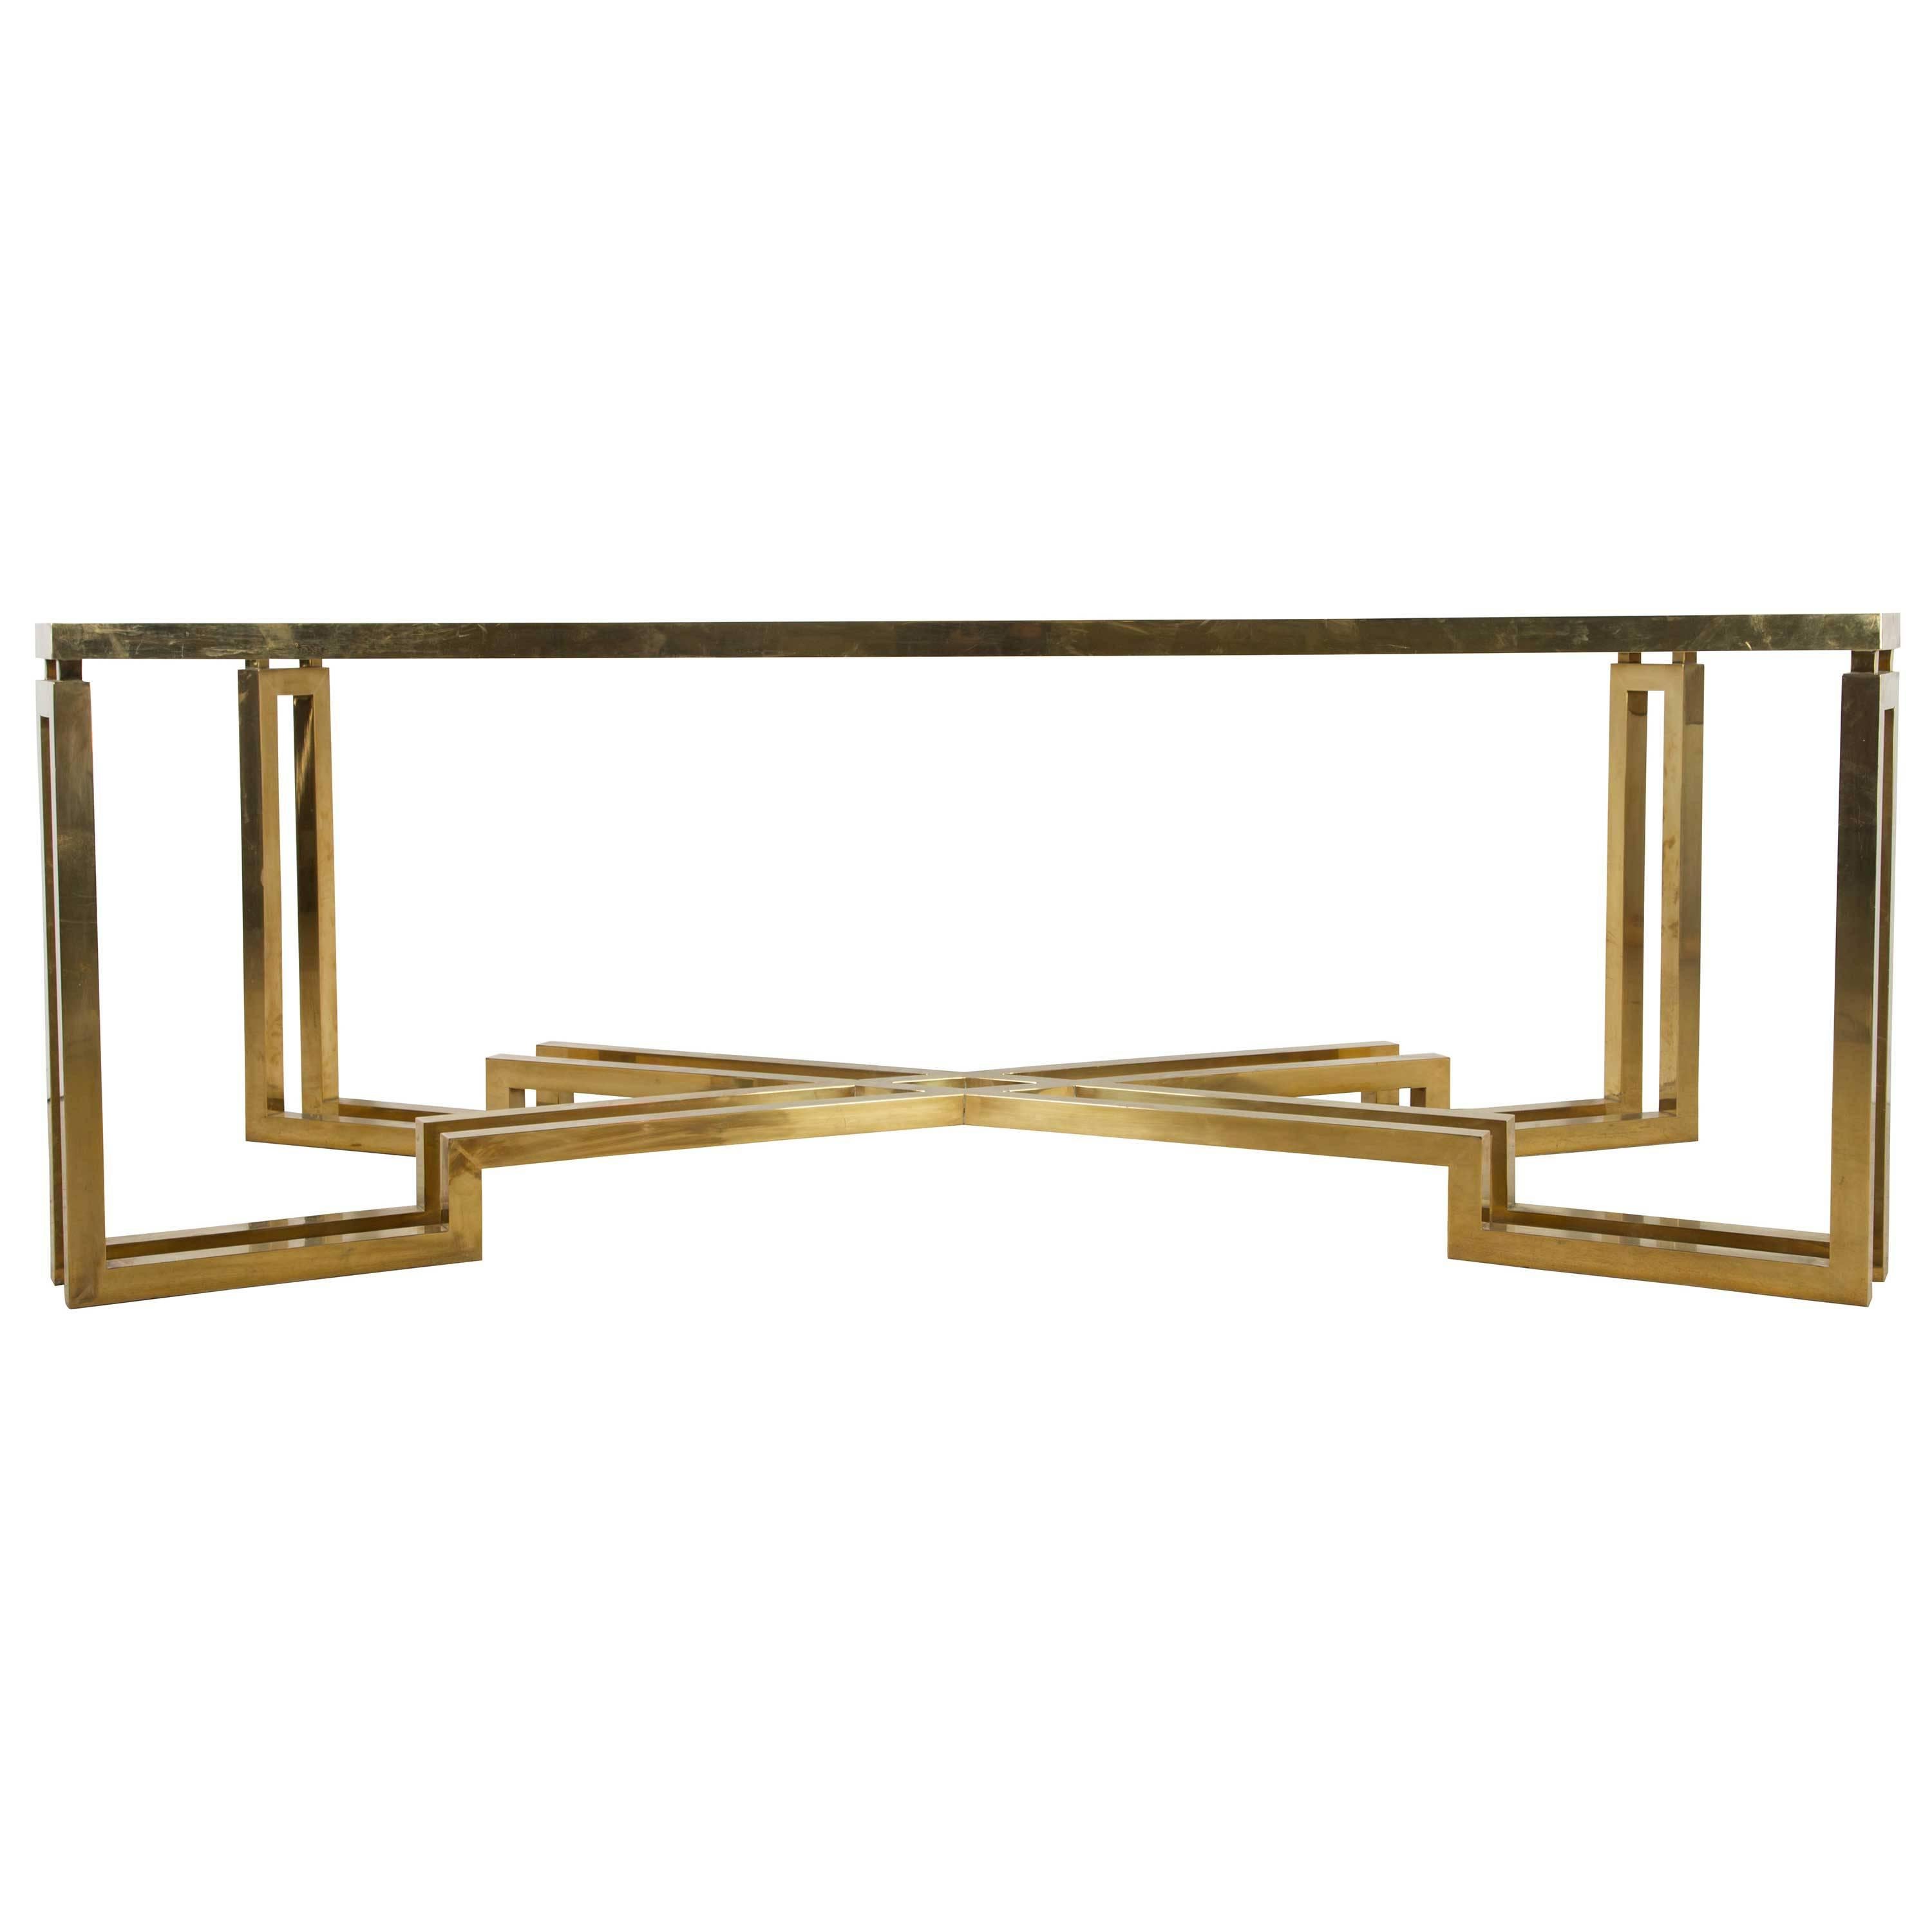 A stunning 1960s Italian brass and glass dining table.